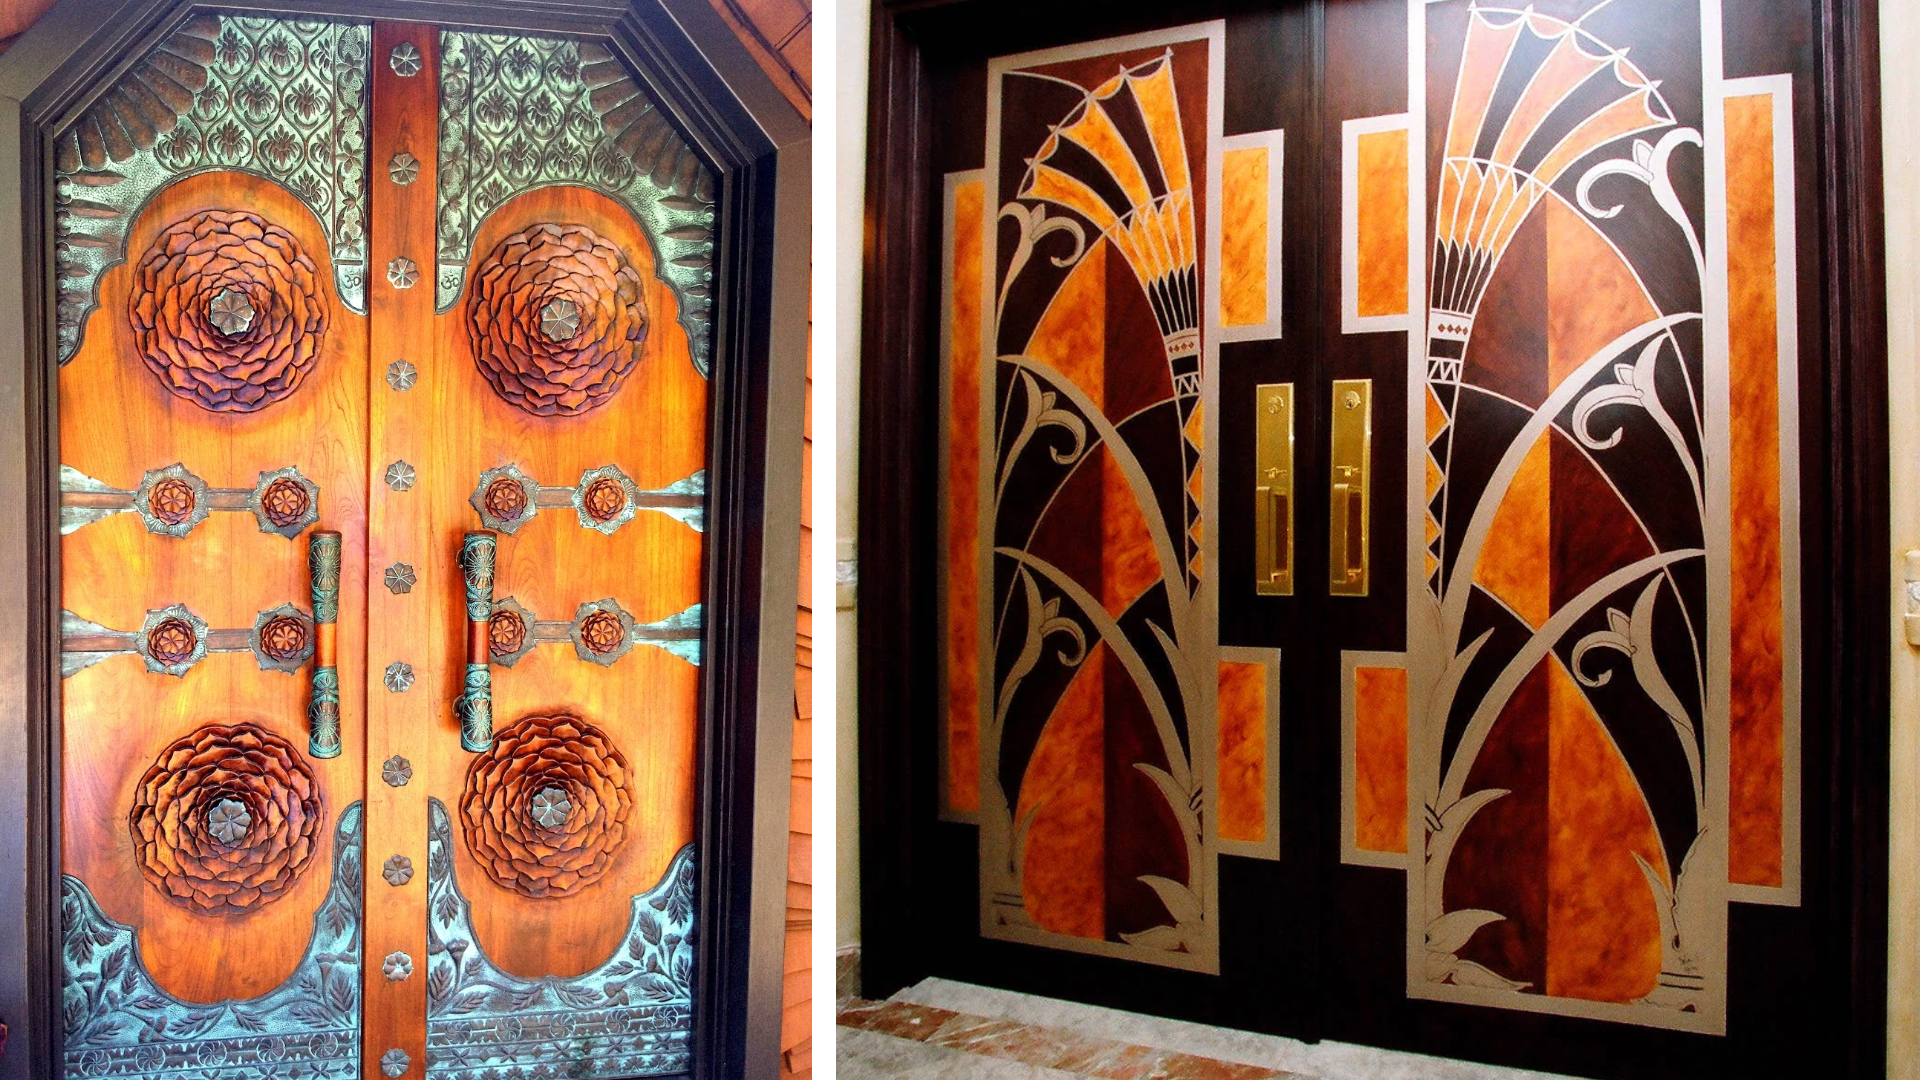 A collage of some visually stunning doors.